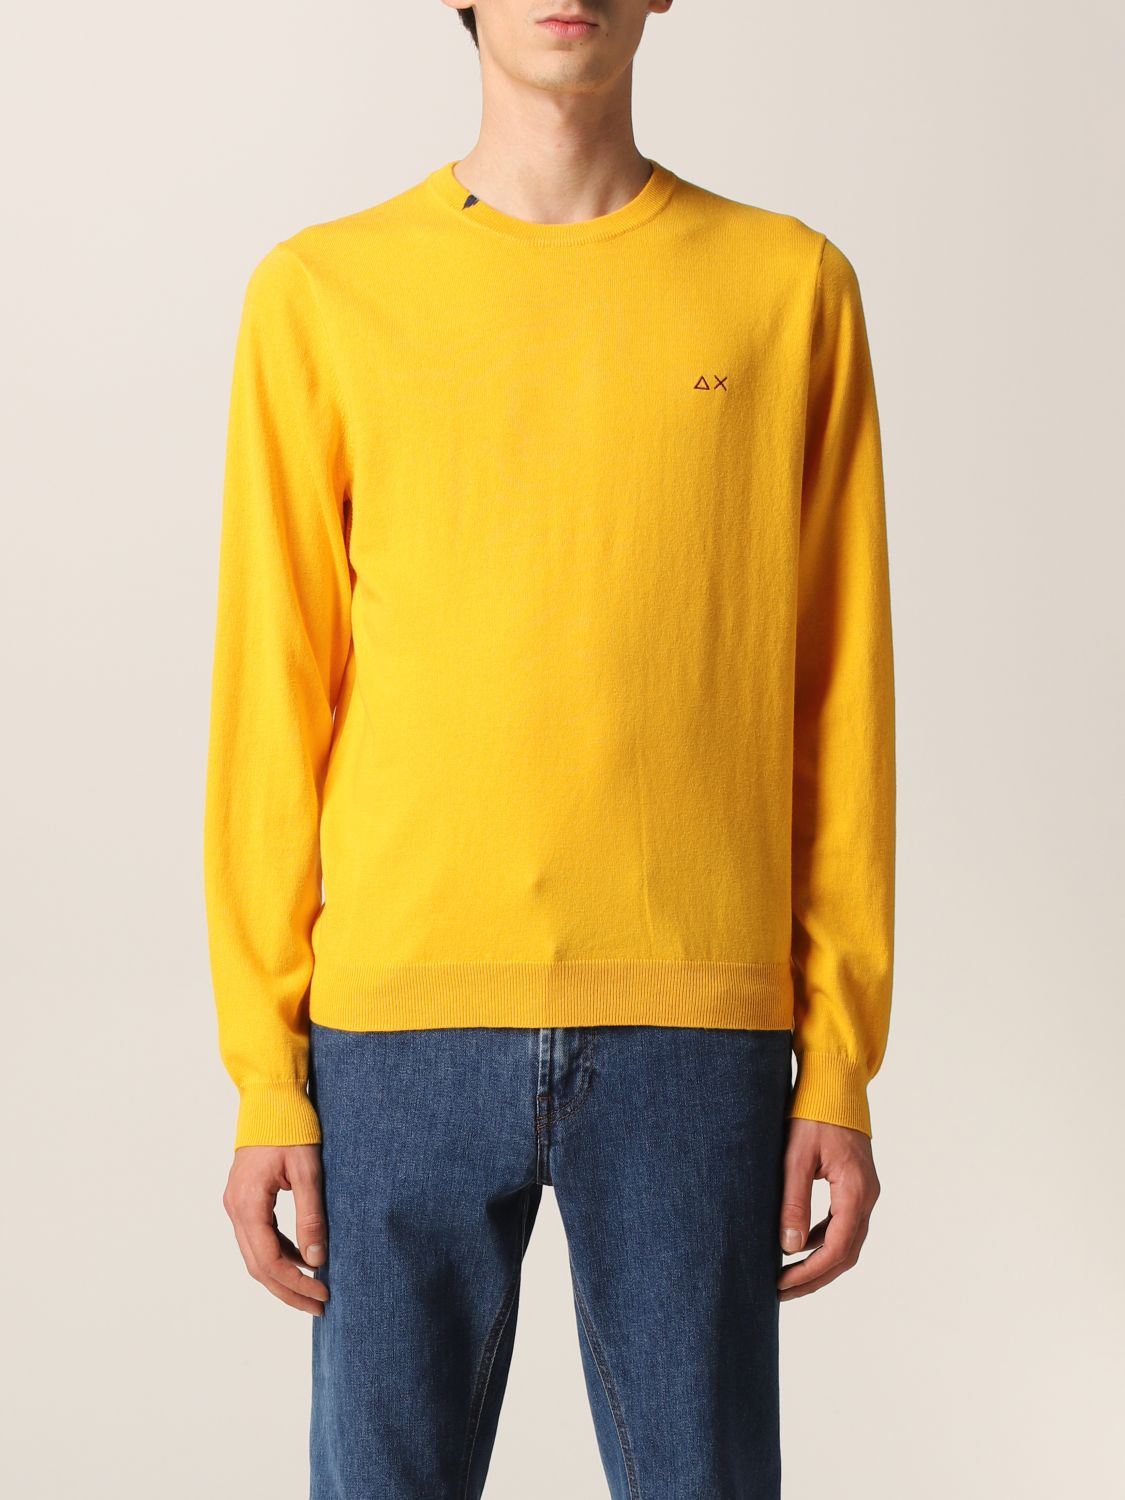 Sun 68 Outlet: sweater for man - Yellow | Sun 68 sweater K41101 online ...